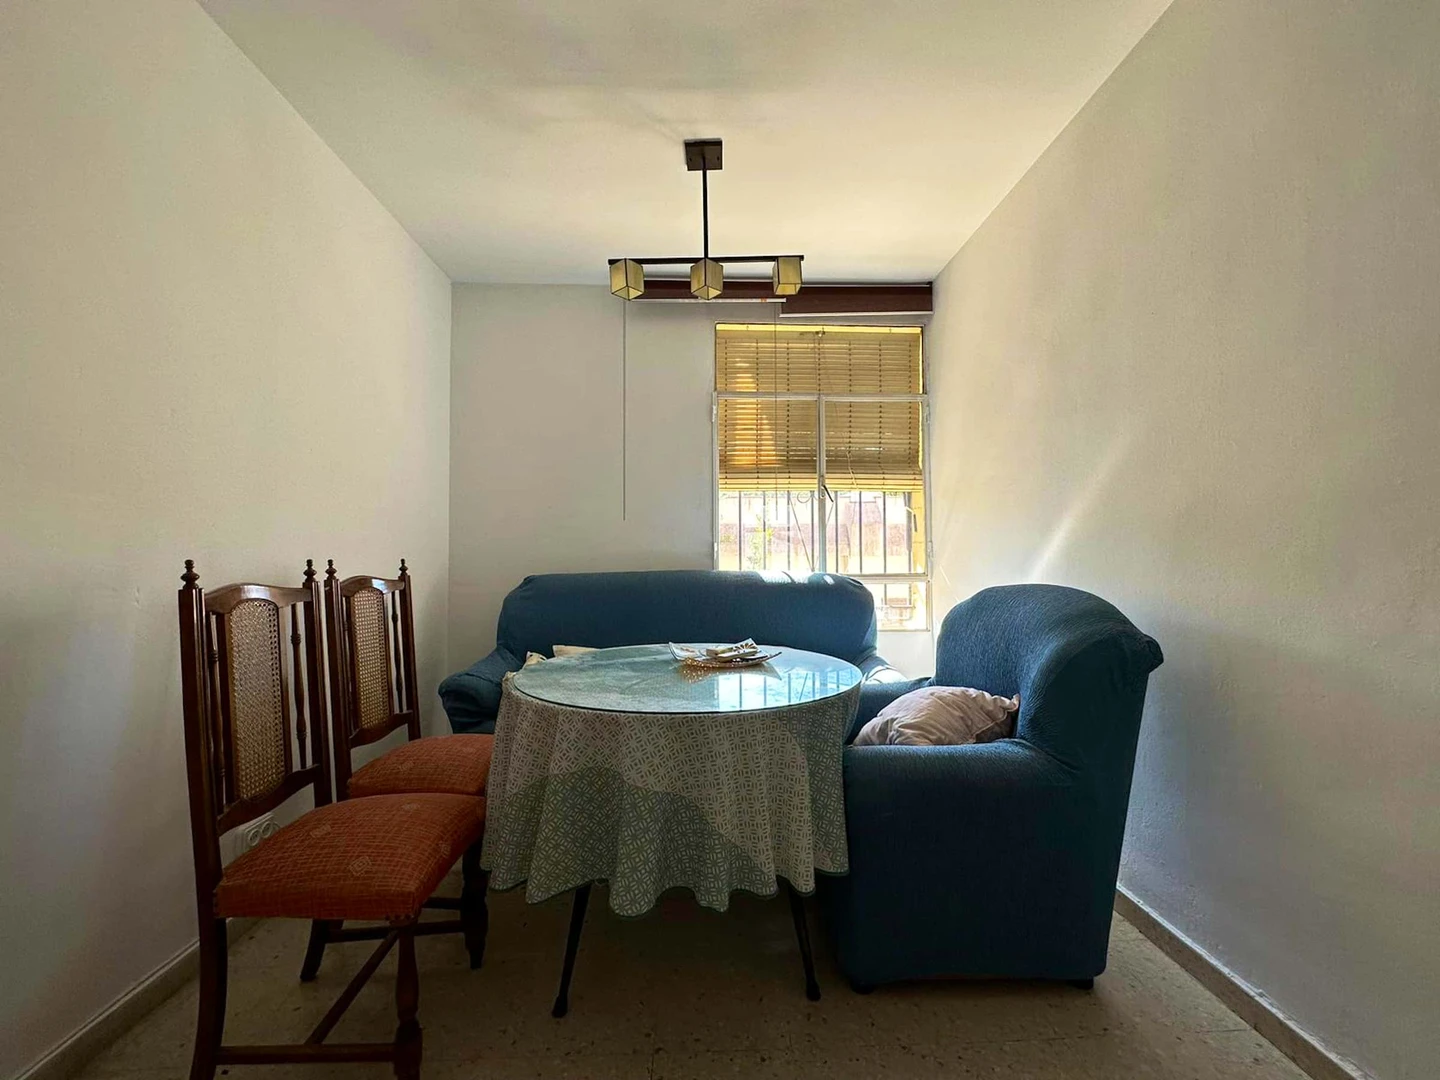 Room for rent in a shared flat in Granada